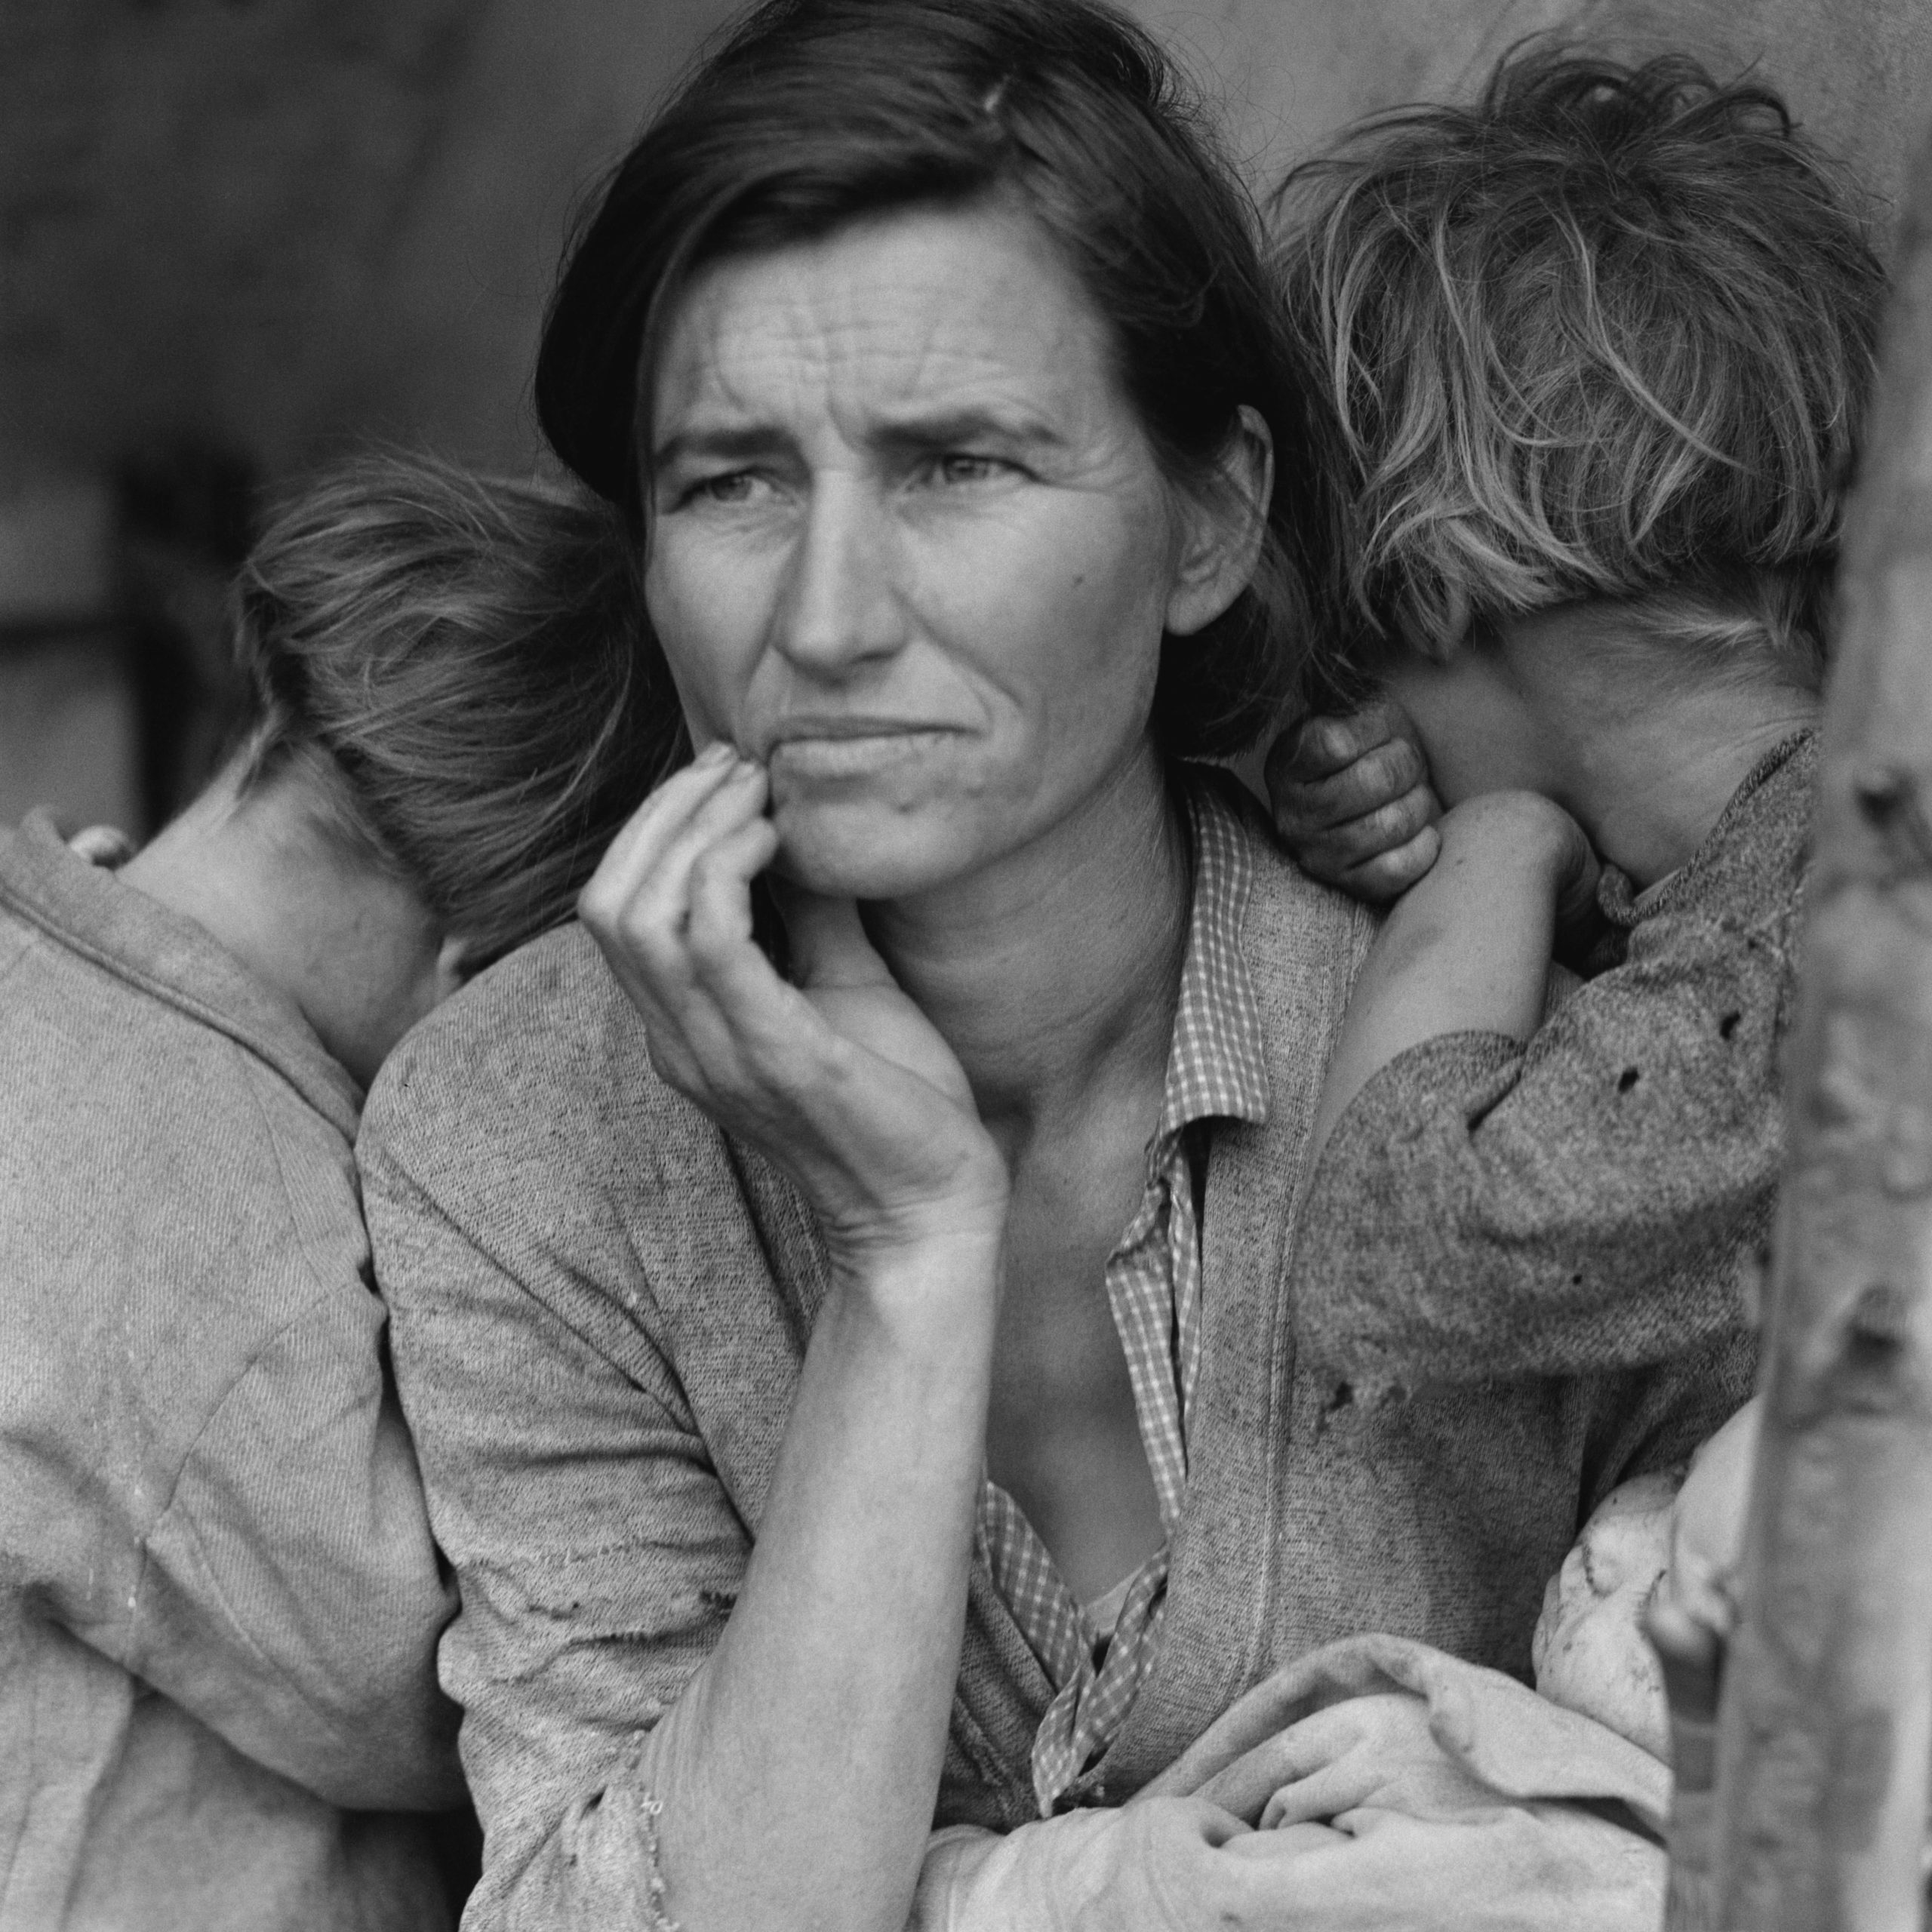 Dorothea Lange, Migrant Mother, Nipomo California, 1936, printed later, gelatin silver print, 35.24 x 27.78 cm (Los Angeles County Museum of Art, PG.1997.2)